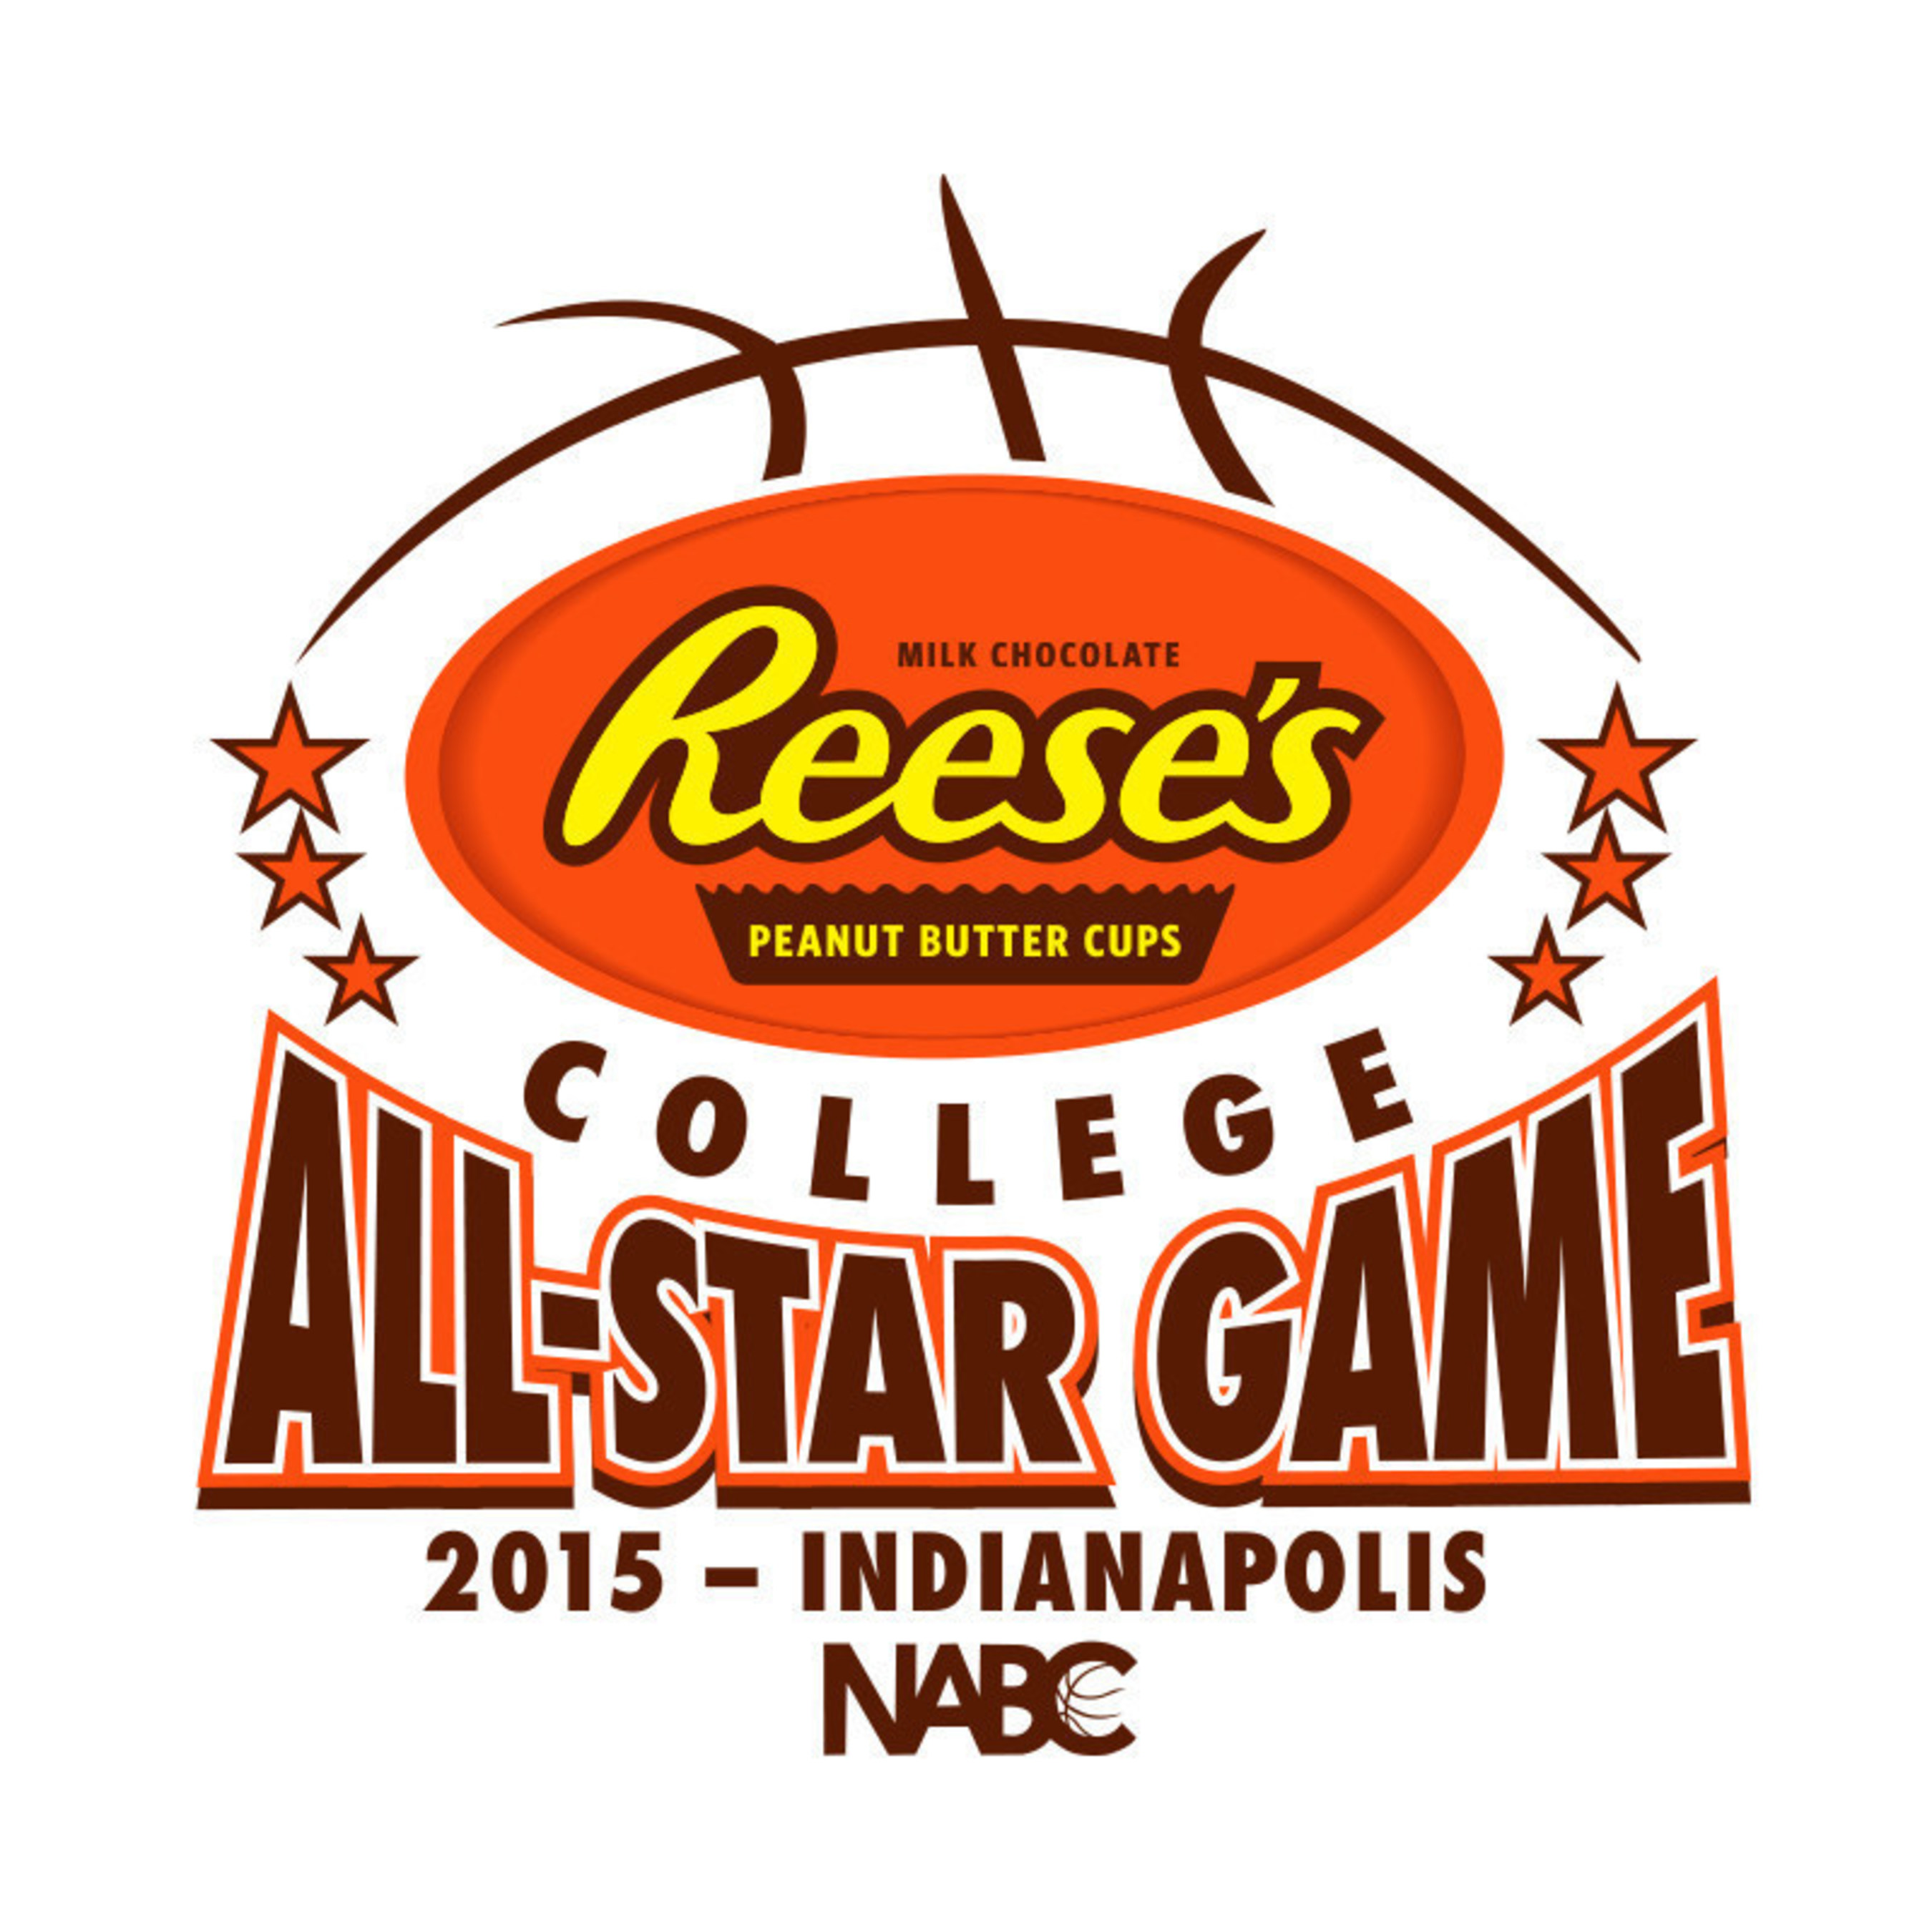 Reese's Peanut Butter Cups Continue Their Perfect NCAA(R) Partnership With College All-Star Game And Final Four Friday